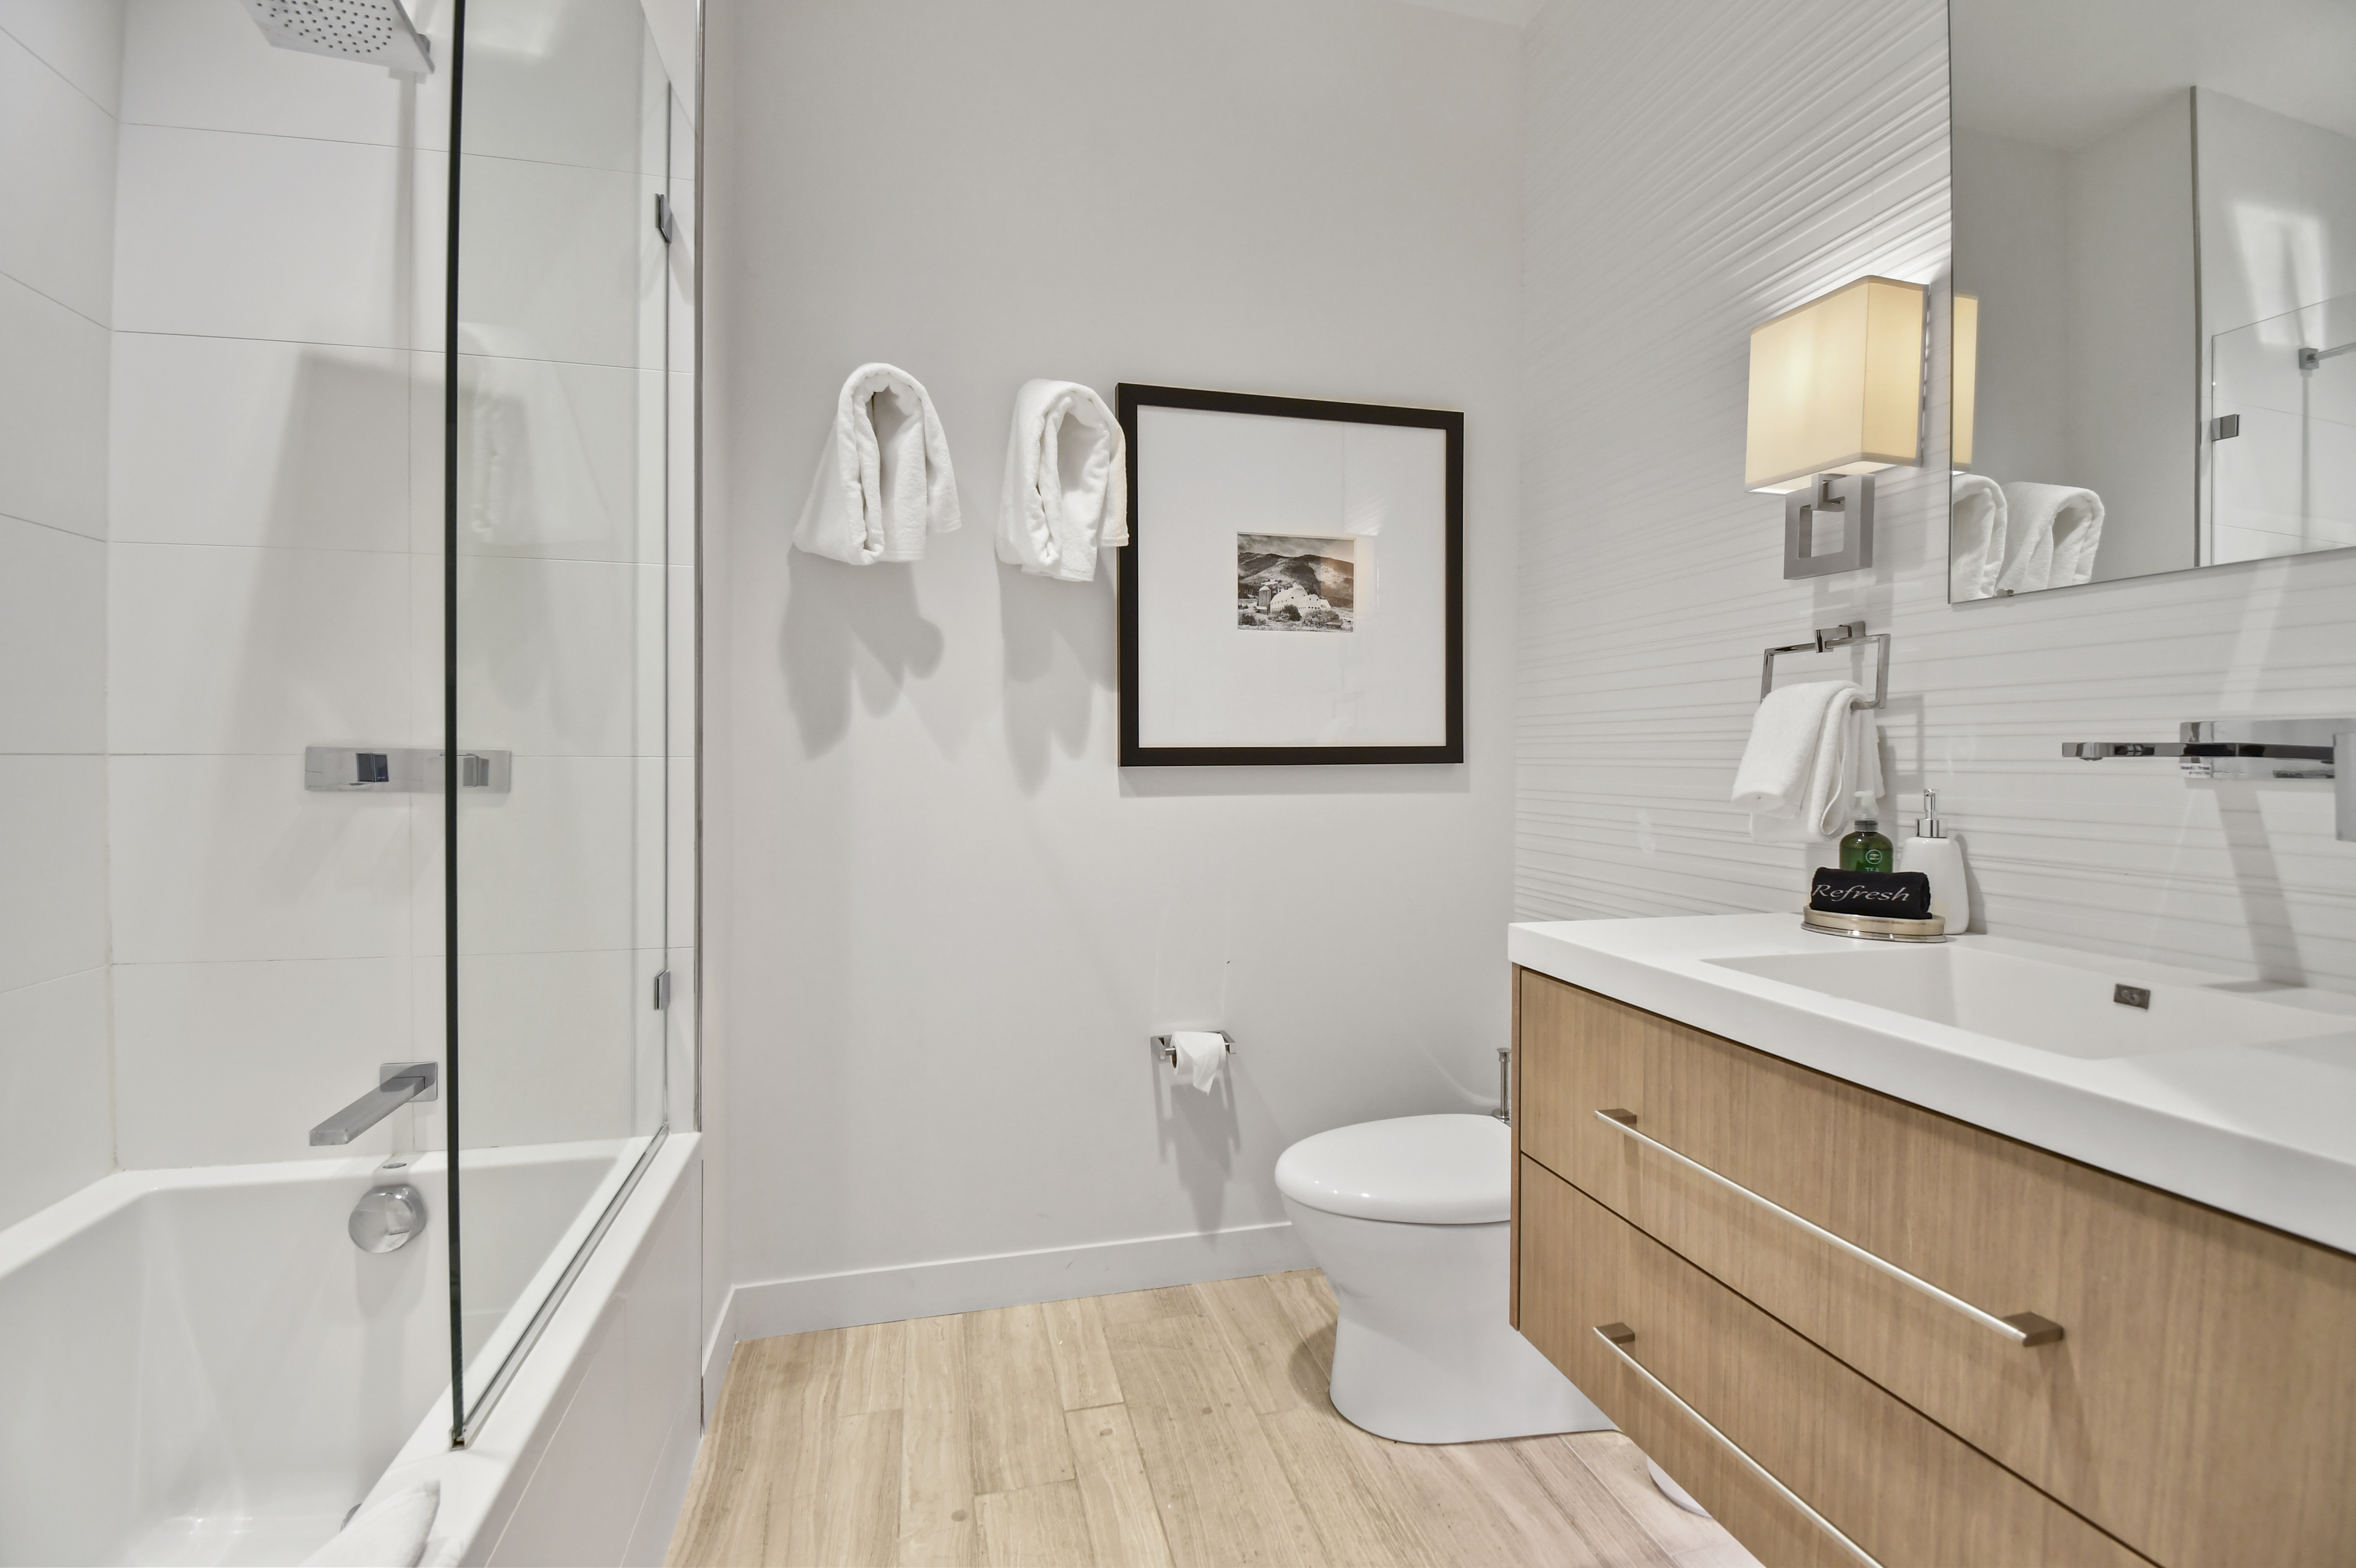 Ensuite bathroom with combination shower and bathtub.